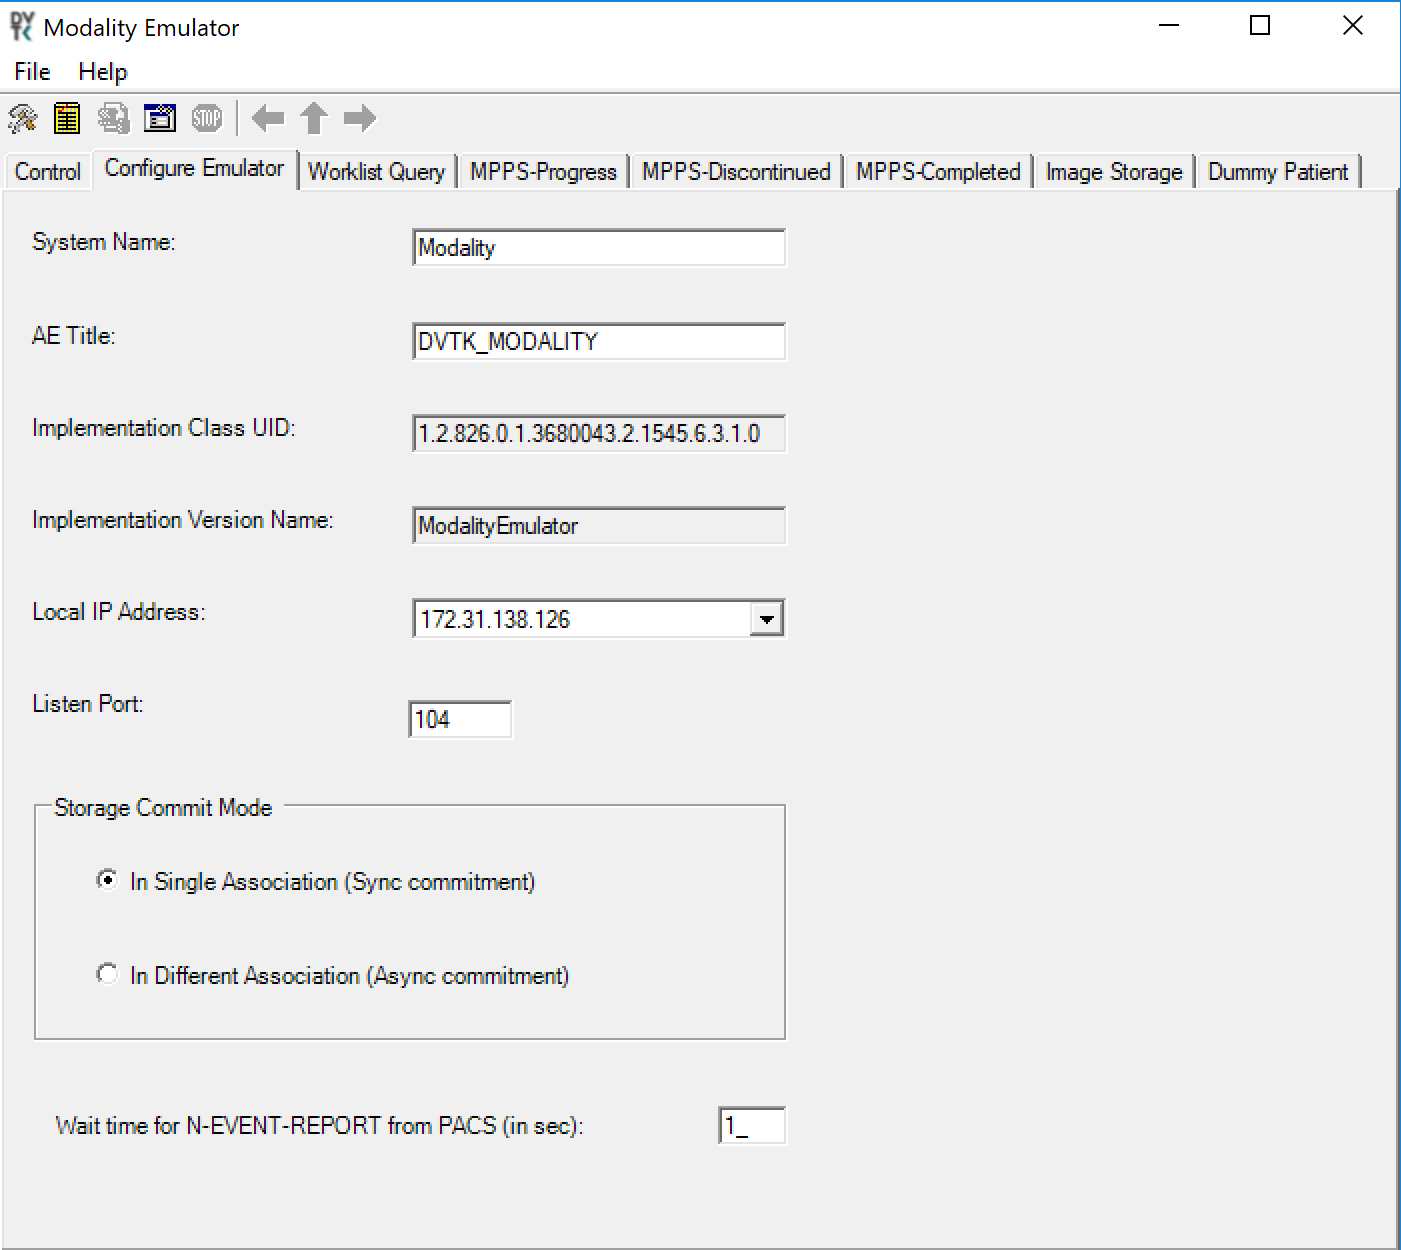 A screenshot of previously defined parameters from DVTk Modality Configuration Part 2.